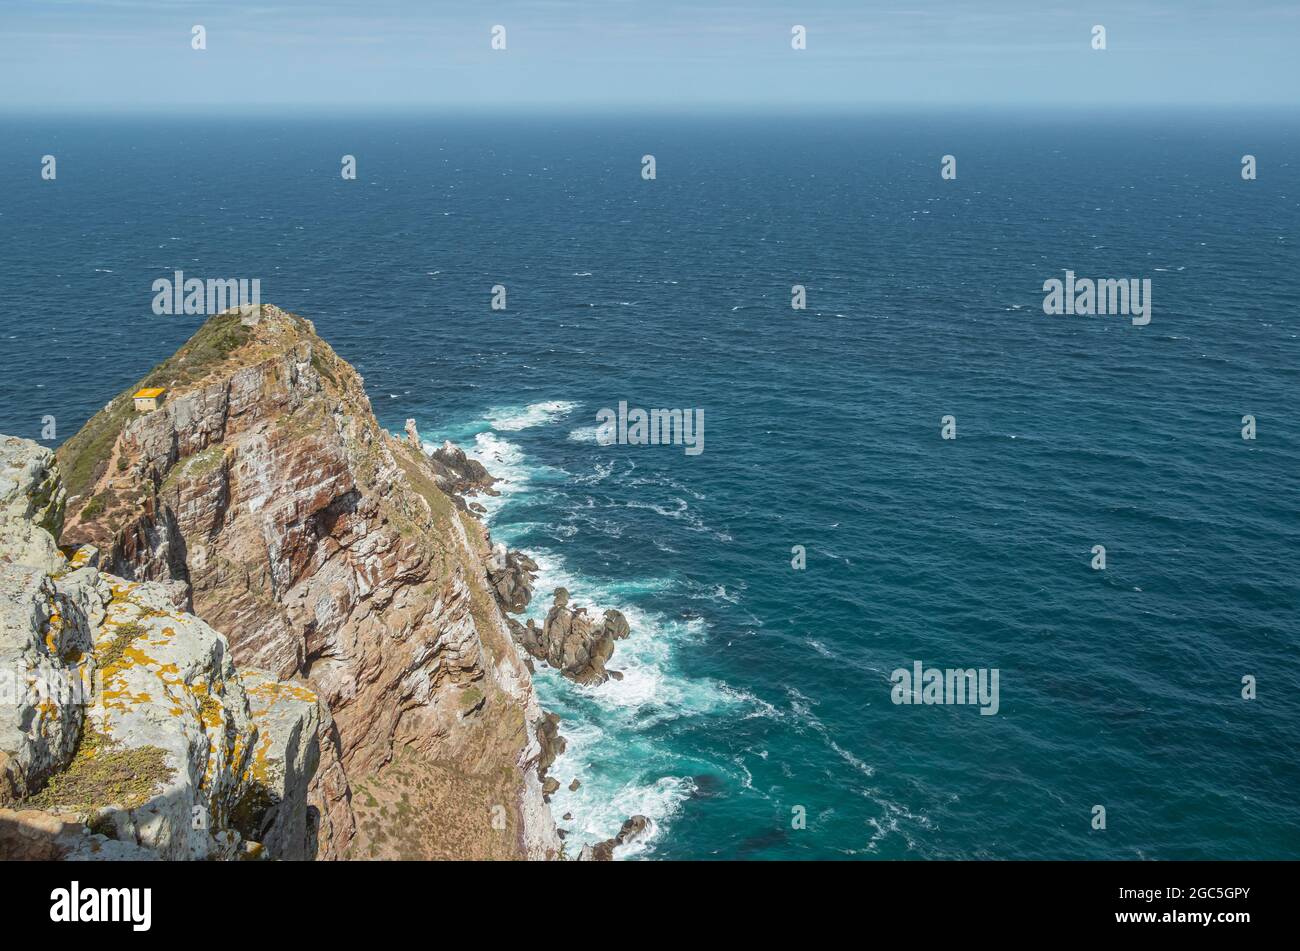 The view of rock headland above the Atlantic Ocean at Cape Point, a mountainous promontory of Cape Point National Park in Cape Peninsula, South Africa. Stock Photo